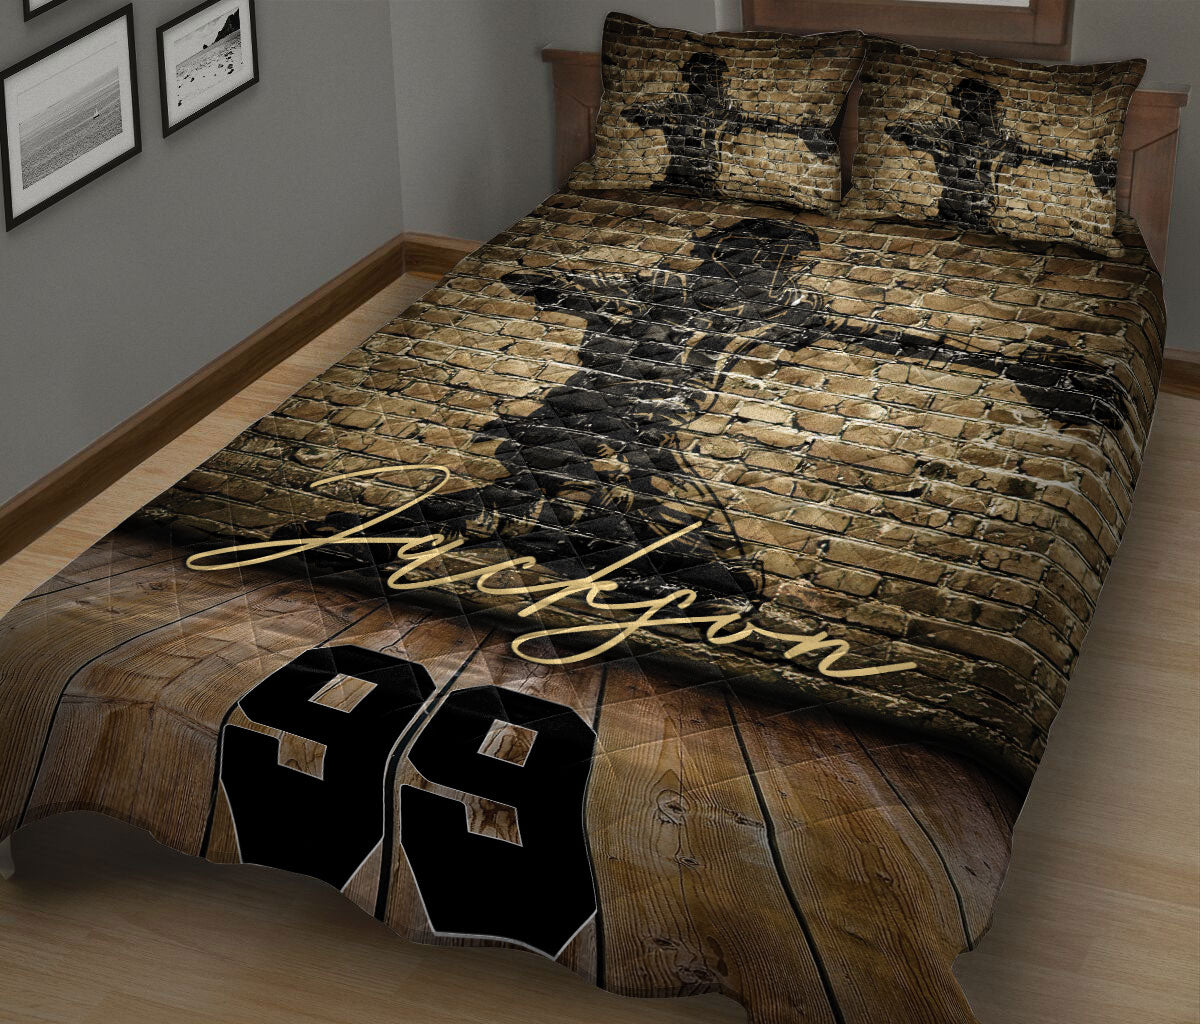 Ohaprints-Quilt-Bed-Set-Pillowcase-Baseball-Player-Wall-Pattern-Sport-Gifts-Custom-Personalized-Name-Number-Blanket-Bedspread-Bedding-1264-King (90'' x 100'')